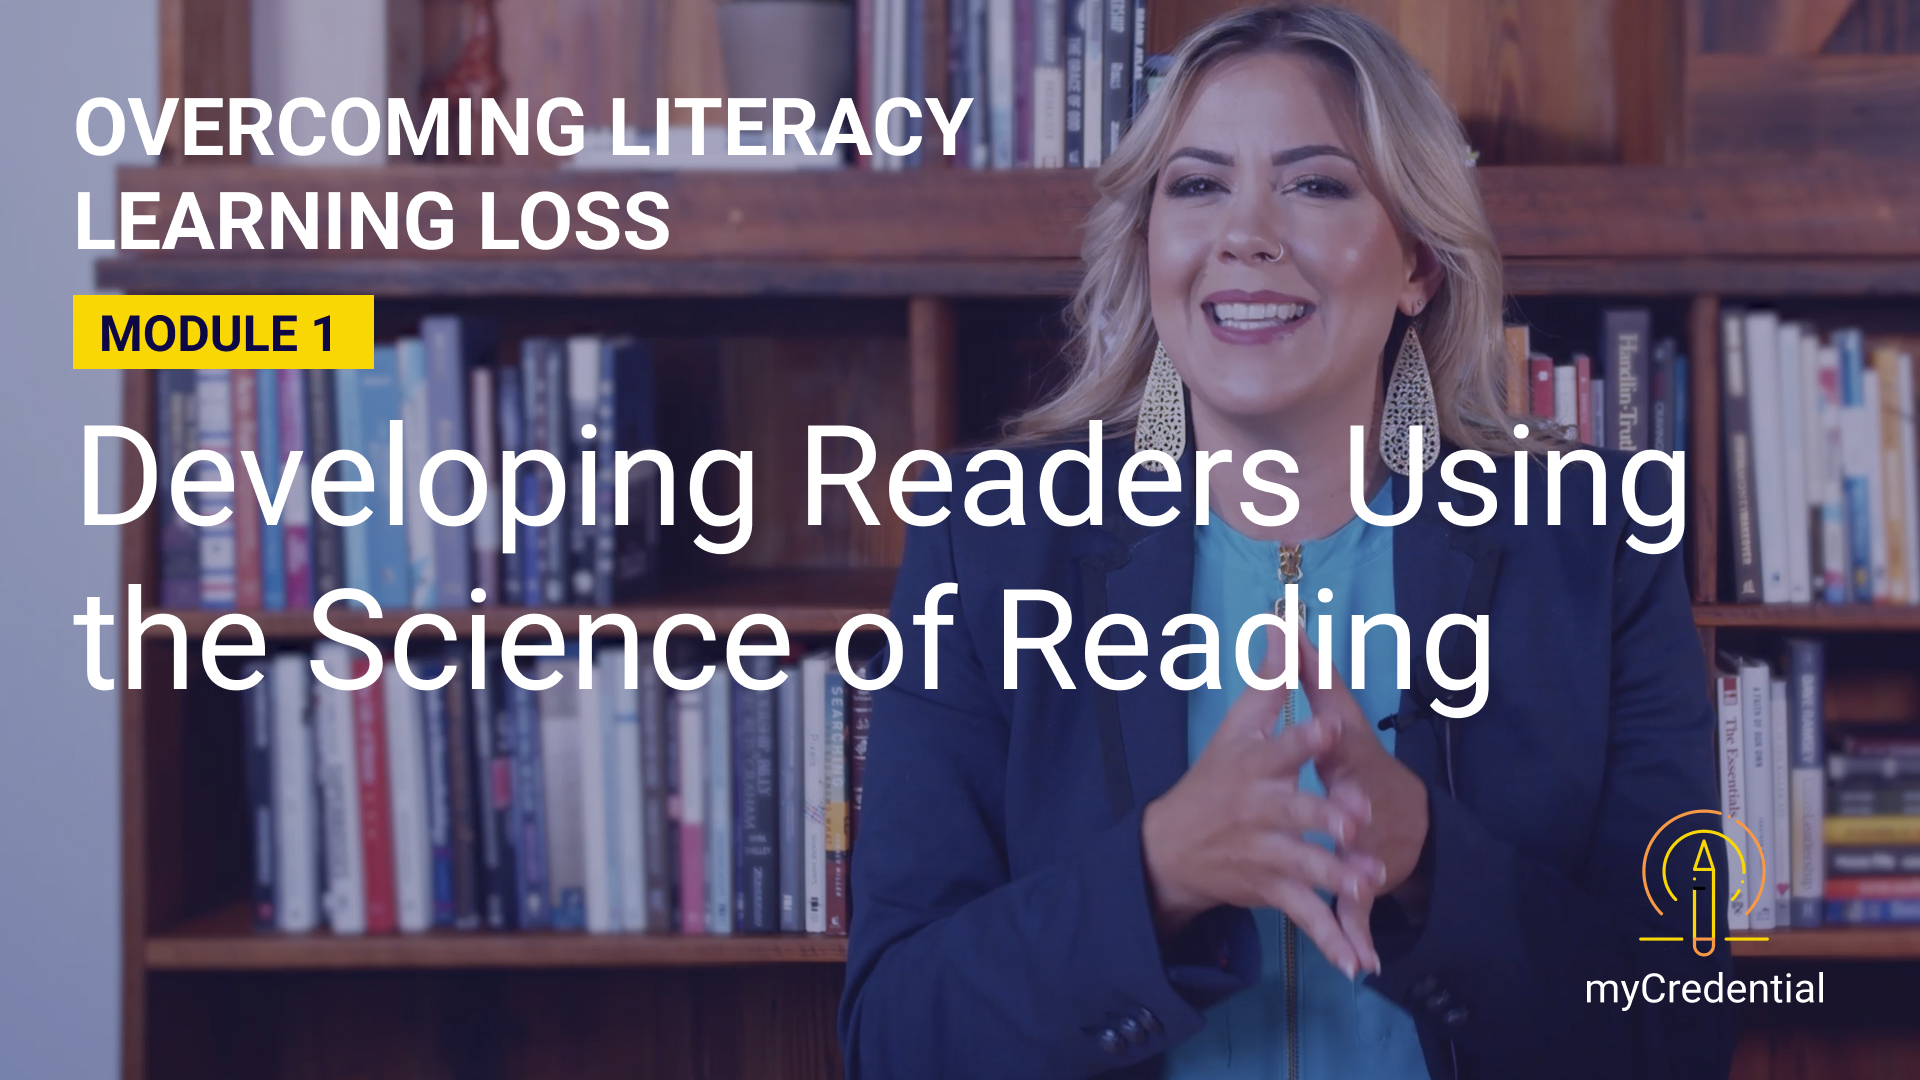 Overcoming Literacy Learning Loss (Module 1): Developing Readers Using the Science of Reading